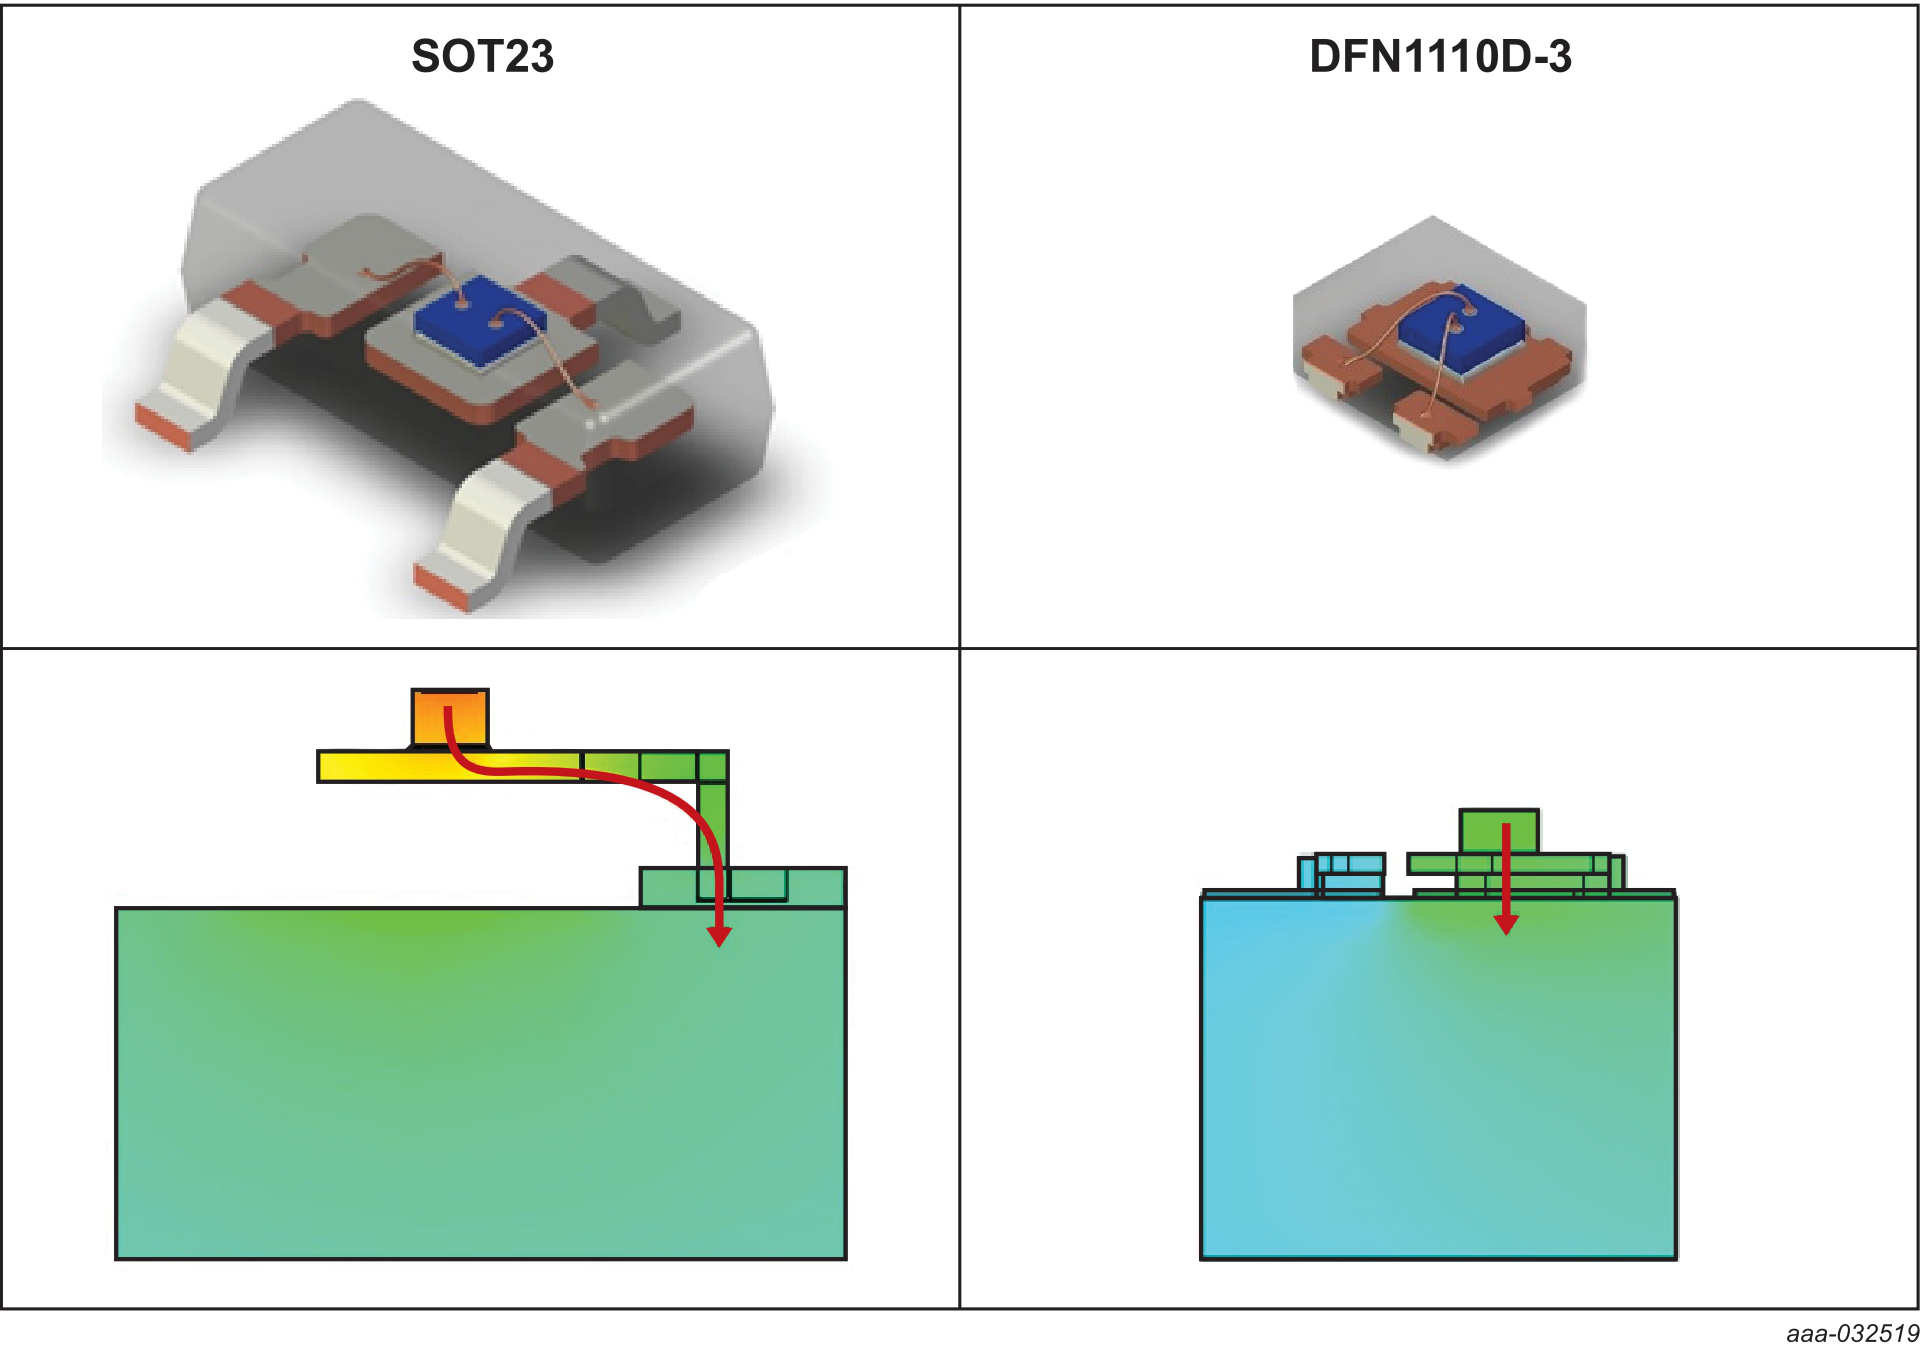 Heat dissipation path for SOT23 and DFN